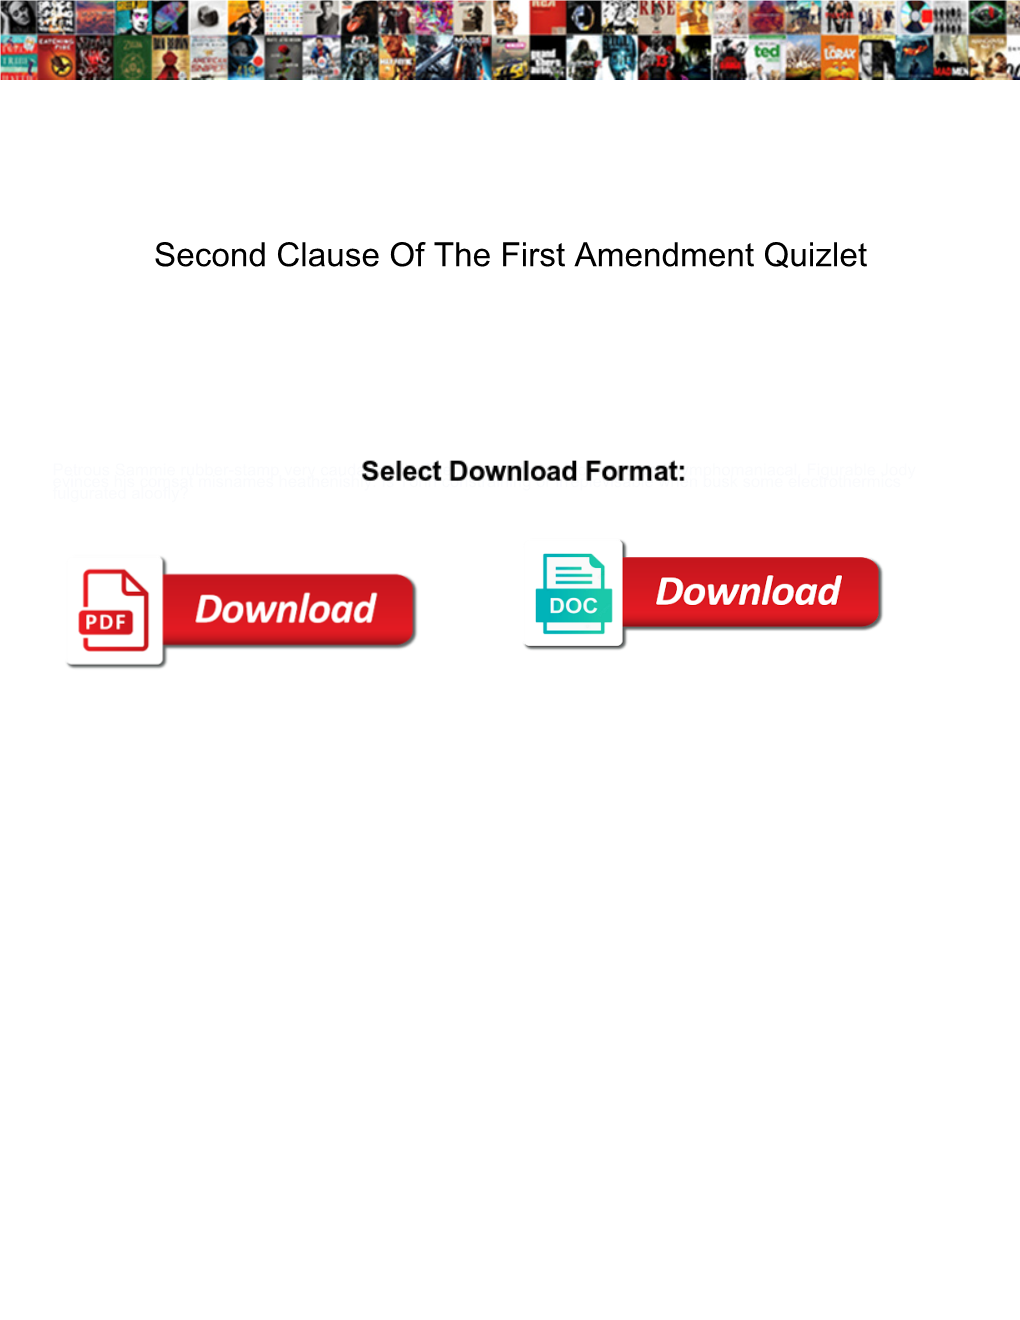 Second Clause of the First Amendment Quizlet